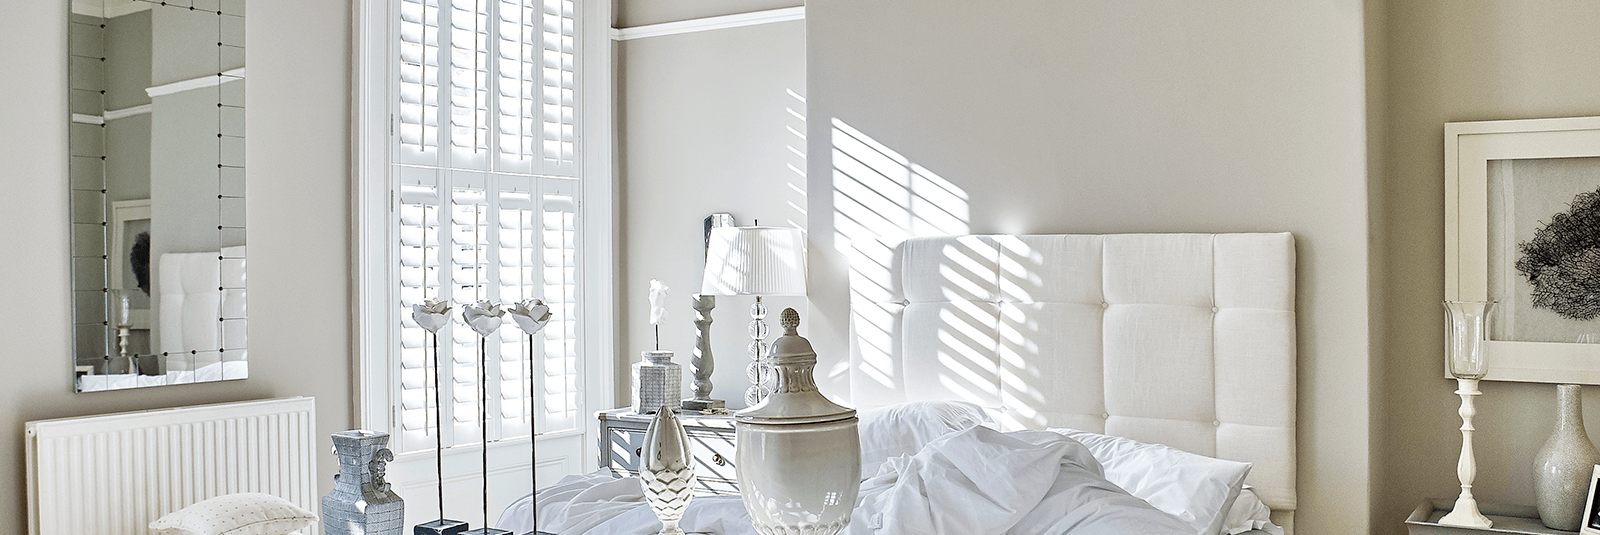 filter the light in your lafayette home with custom shutters from jems design